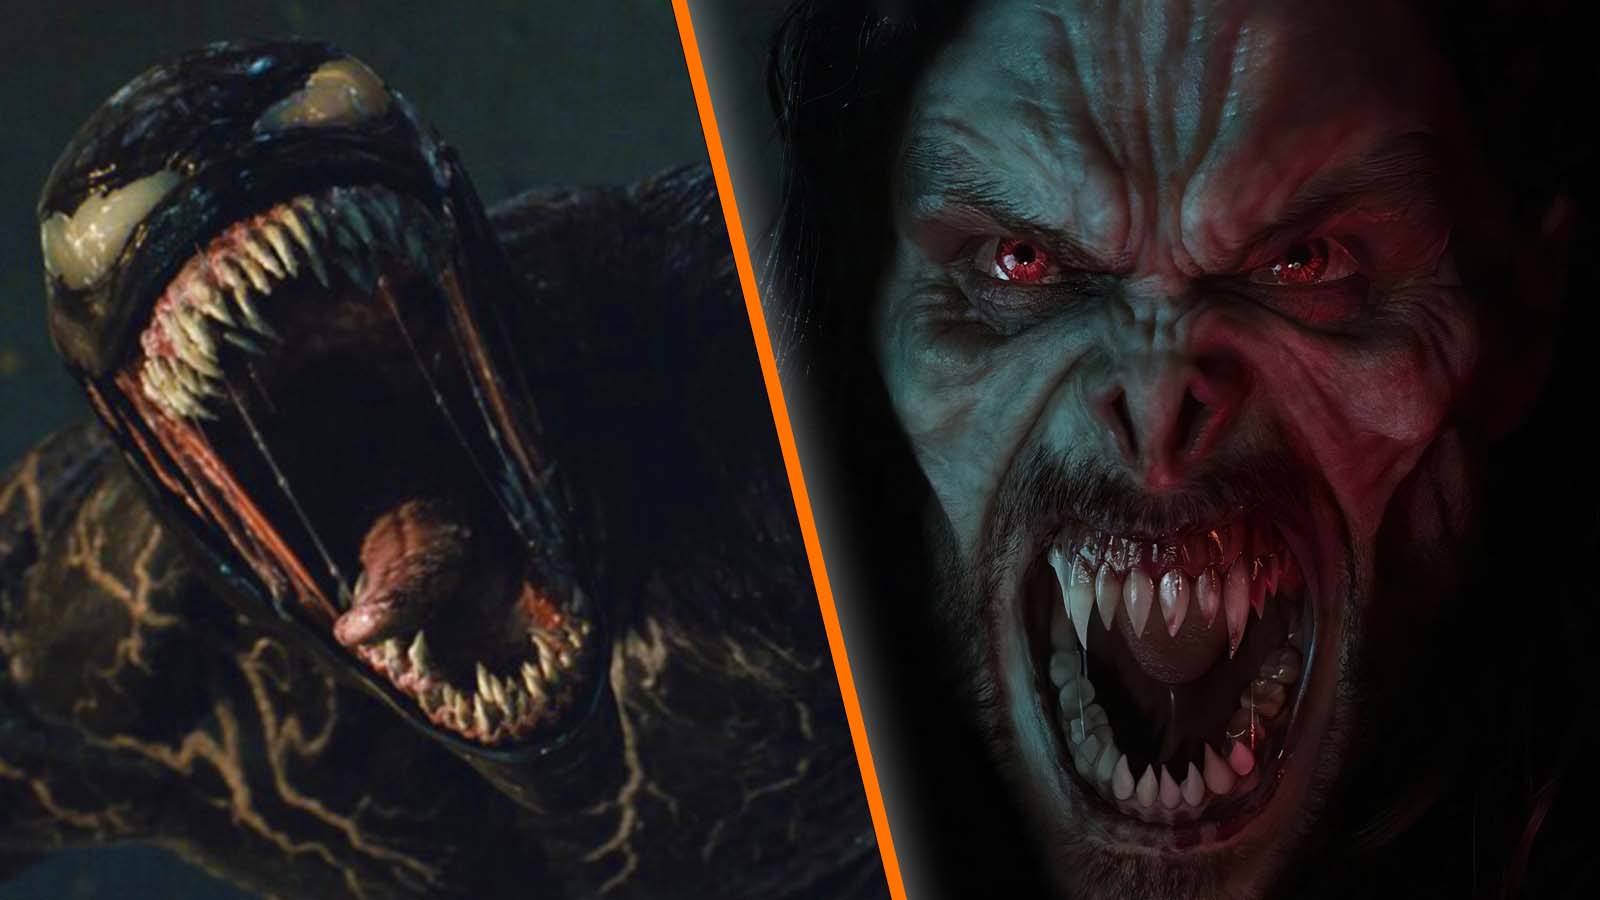 How Is Morbius Related to Venom in the MCU?